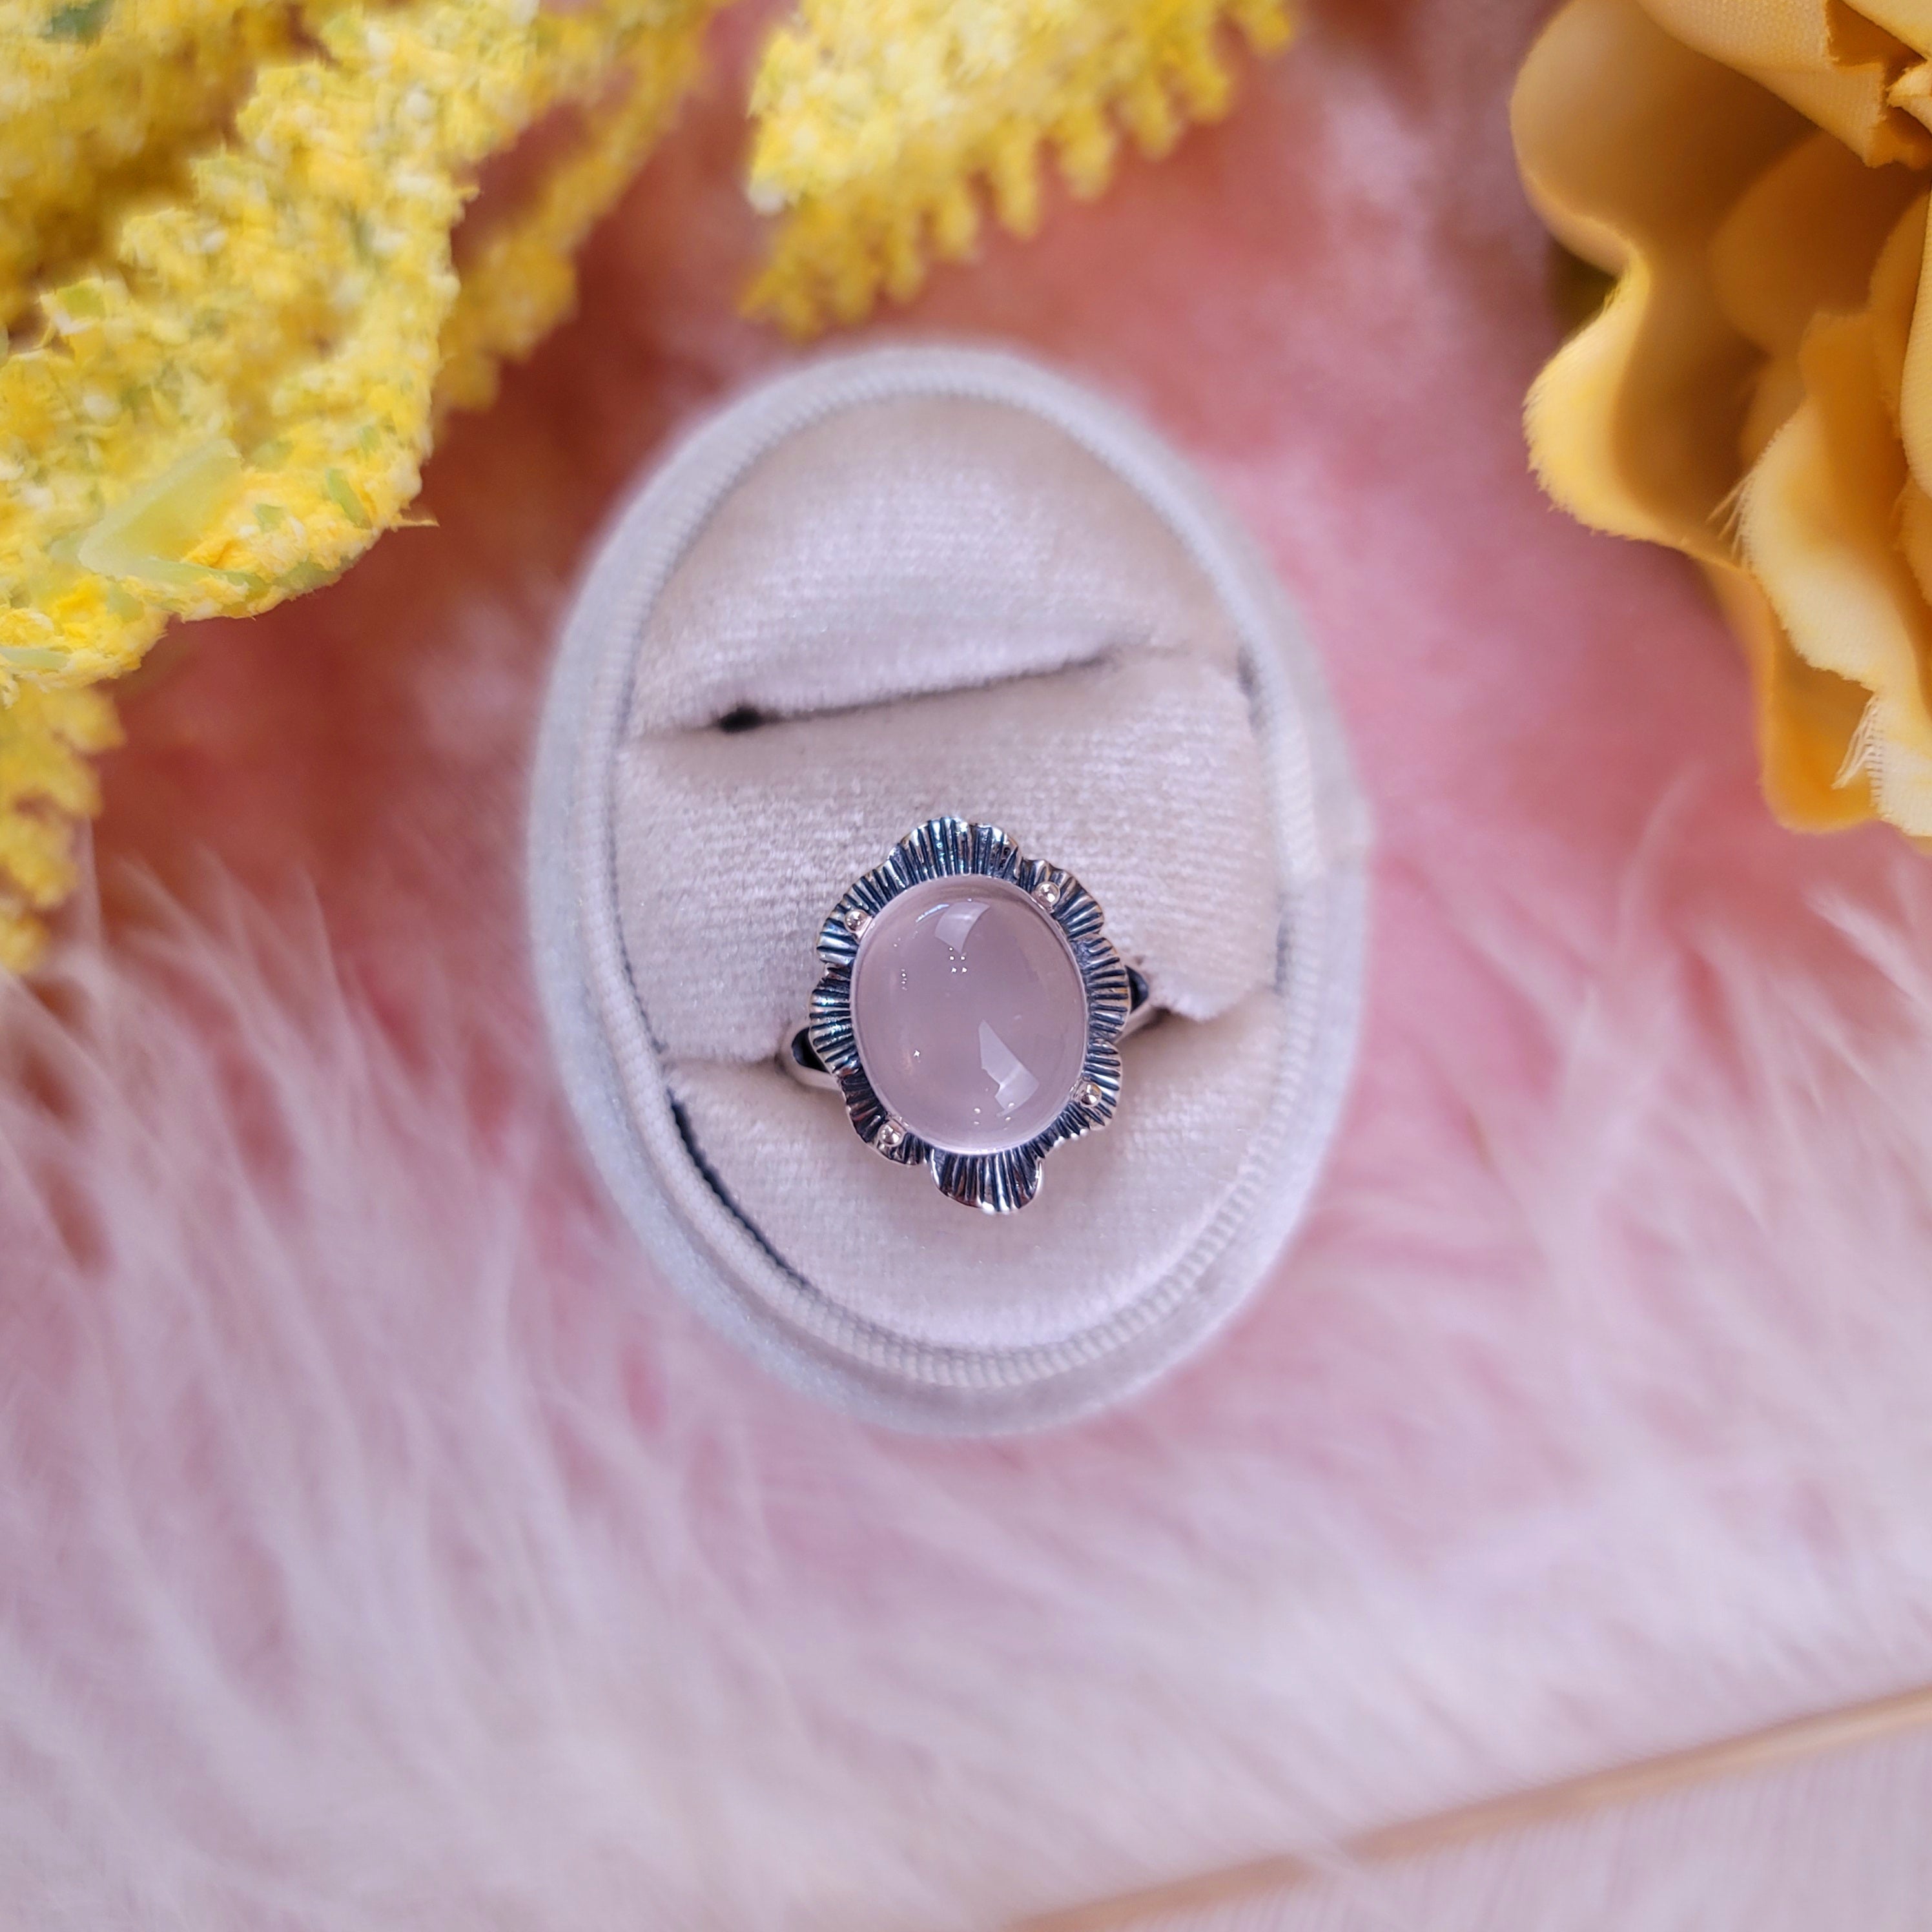 Mozambique Star Rose Quartz Vintage Style Adjustable 925 Silver Ring for Unconditional Love